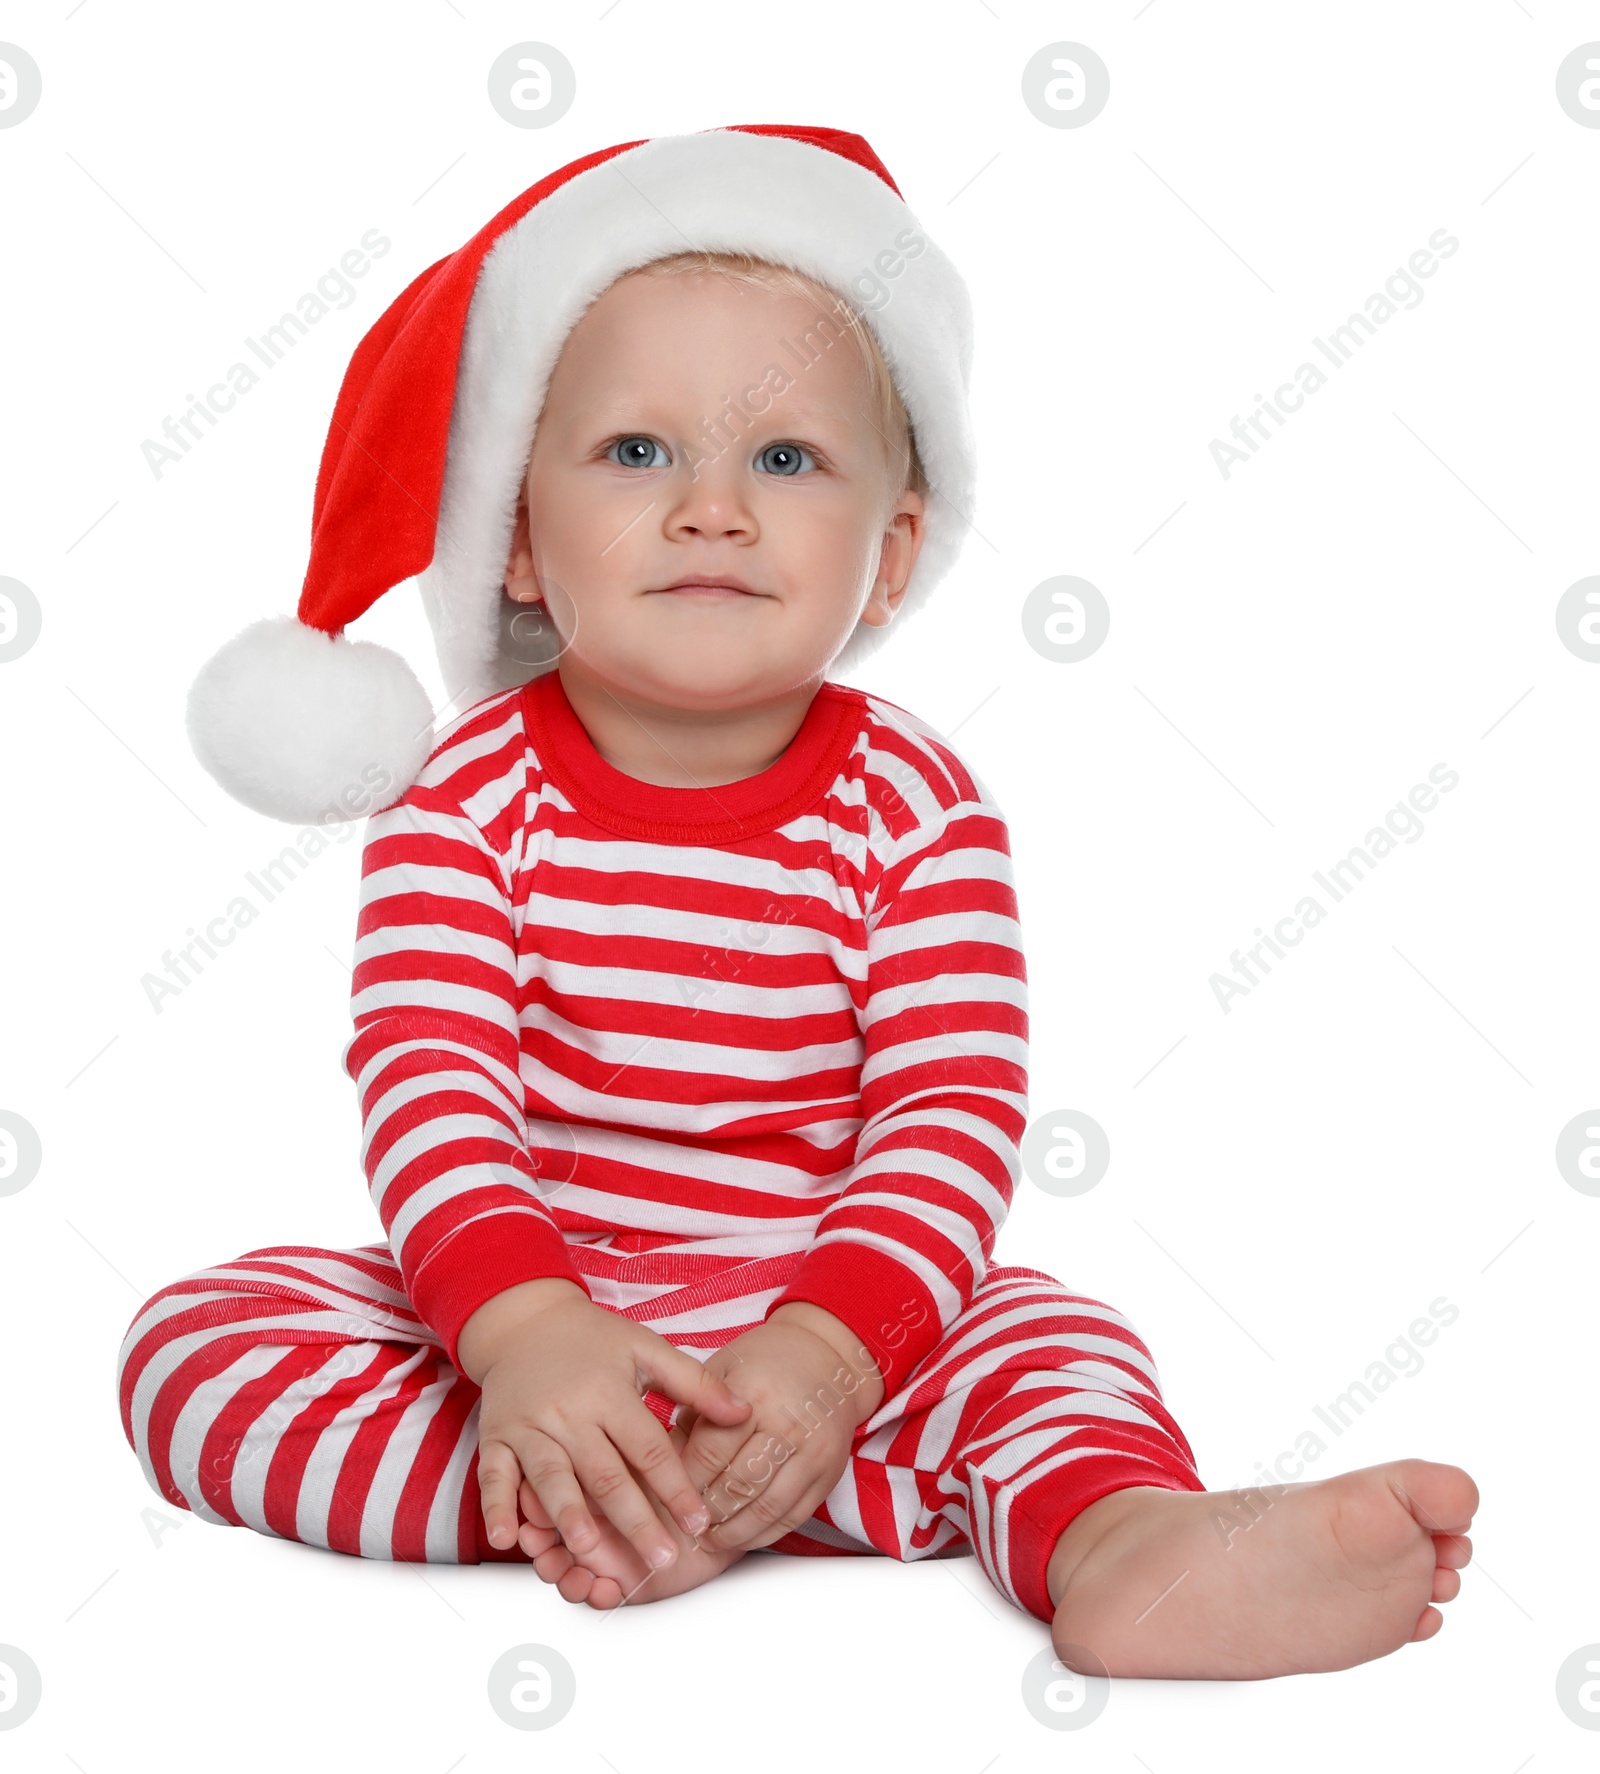 Photo of Cute baby in Santa hat and Christmas pajamas sitting on white background